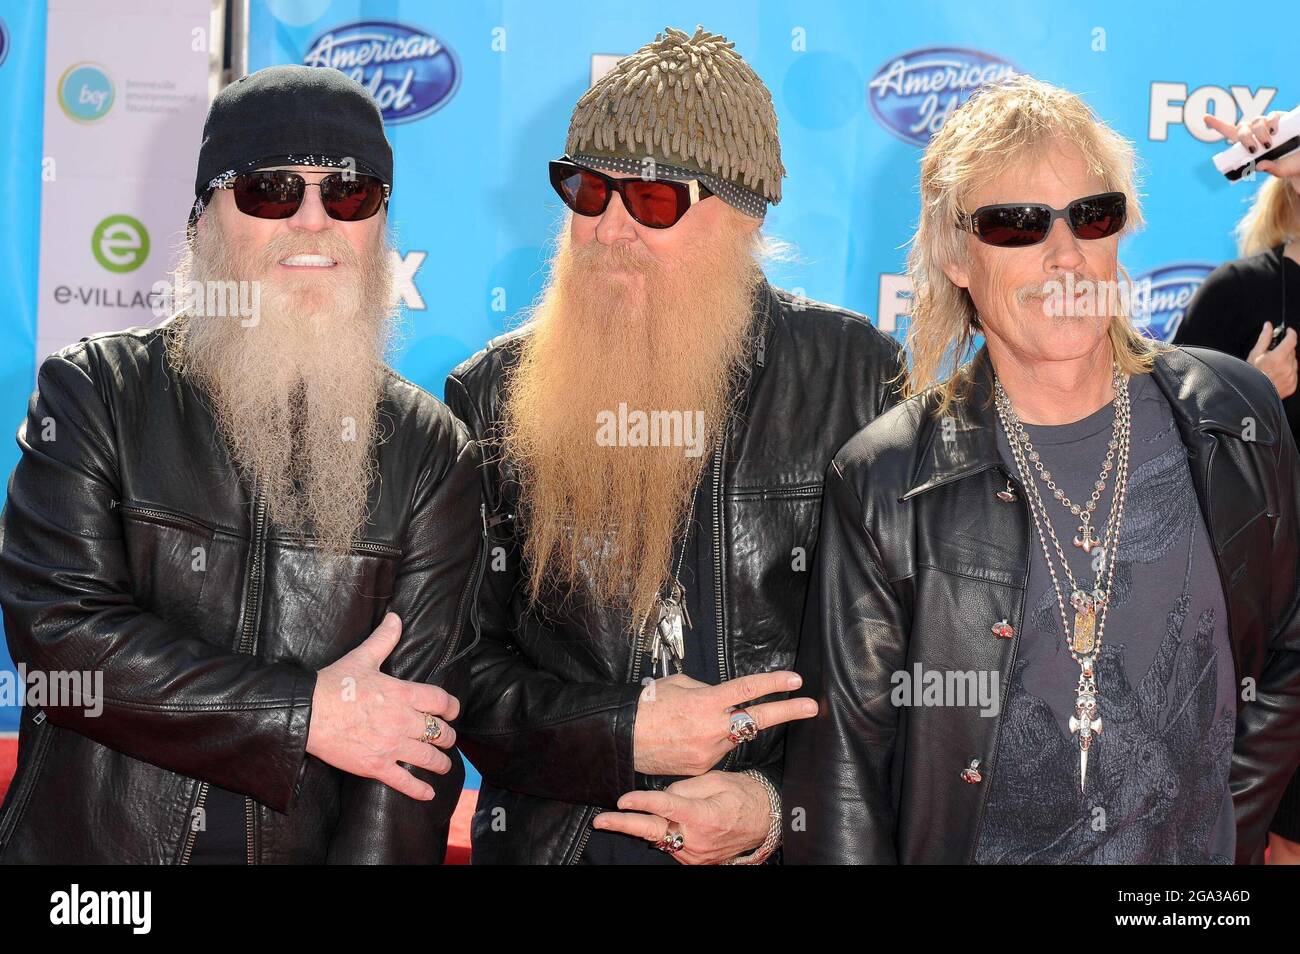 Los Angeles, USA. 21st May, 2008. Dusty Hill, John Cusimano and Billy F. Gibbons of ZZ Top. 21 May 2008 - Los Angeles, California. American Idol 2008 Grand Finale - Arrivals at the Nokia Theatre. Photo Credit: Giulio Marcocchi/Sipa Press. /Idol gm.066/0805220936 Credit: Sipa USA/Alamy Live News Stock Photo